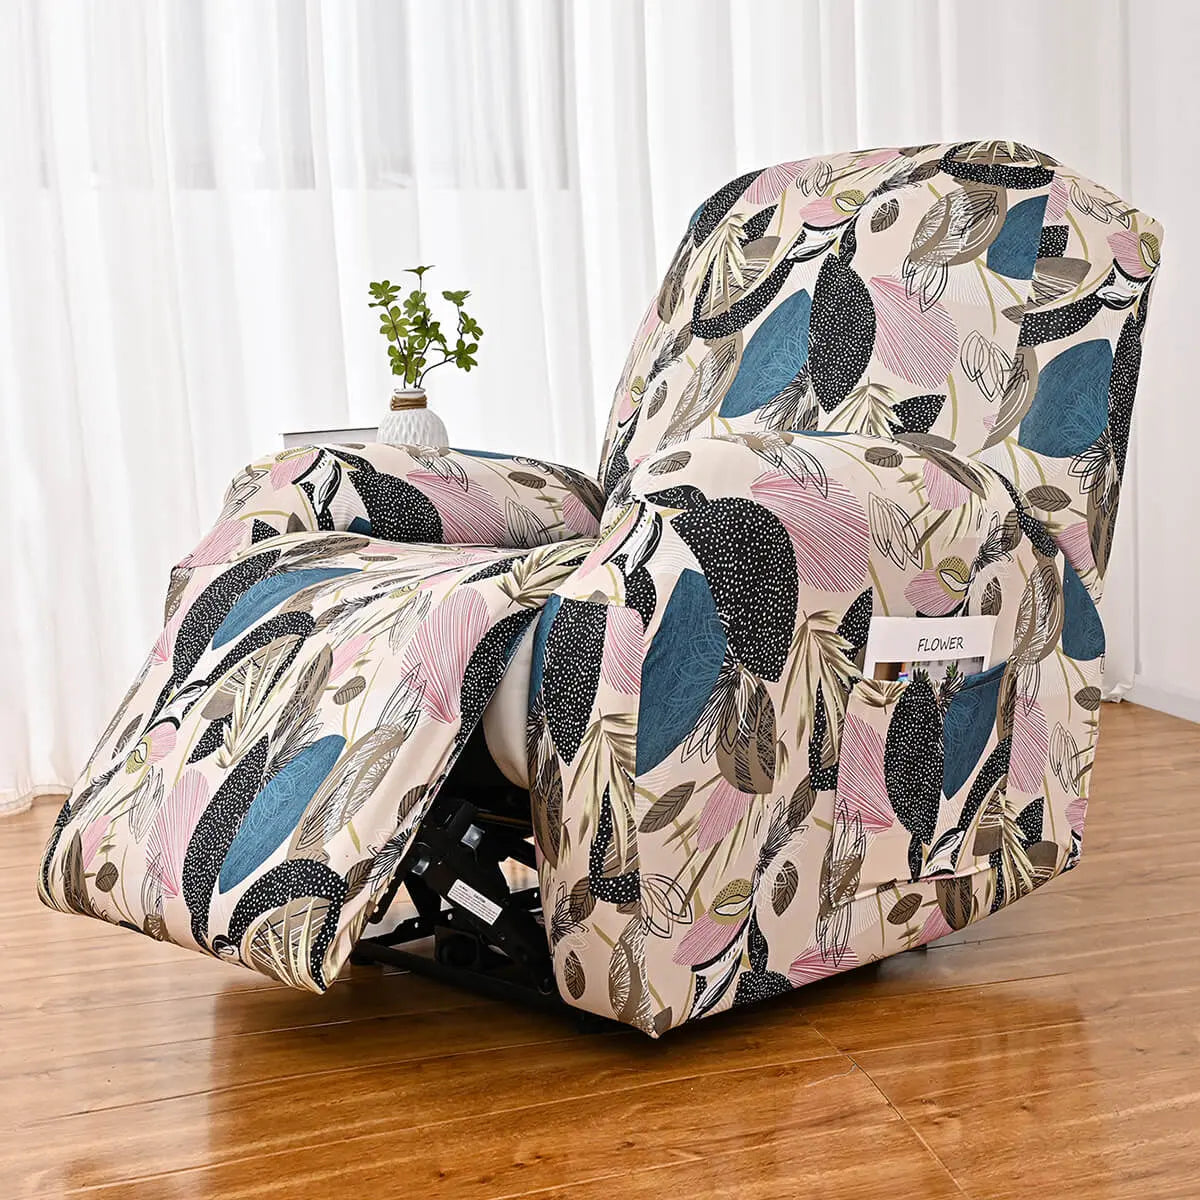 Stretch Printed Sofa Cover 4-Piece Lazy Boy Chair Covers Crfatop %sku%